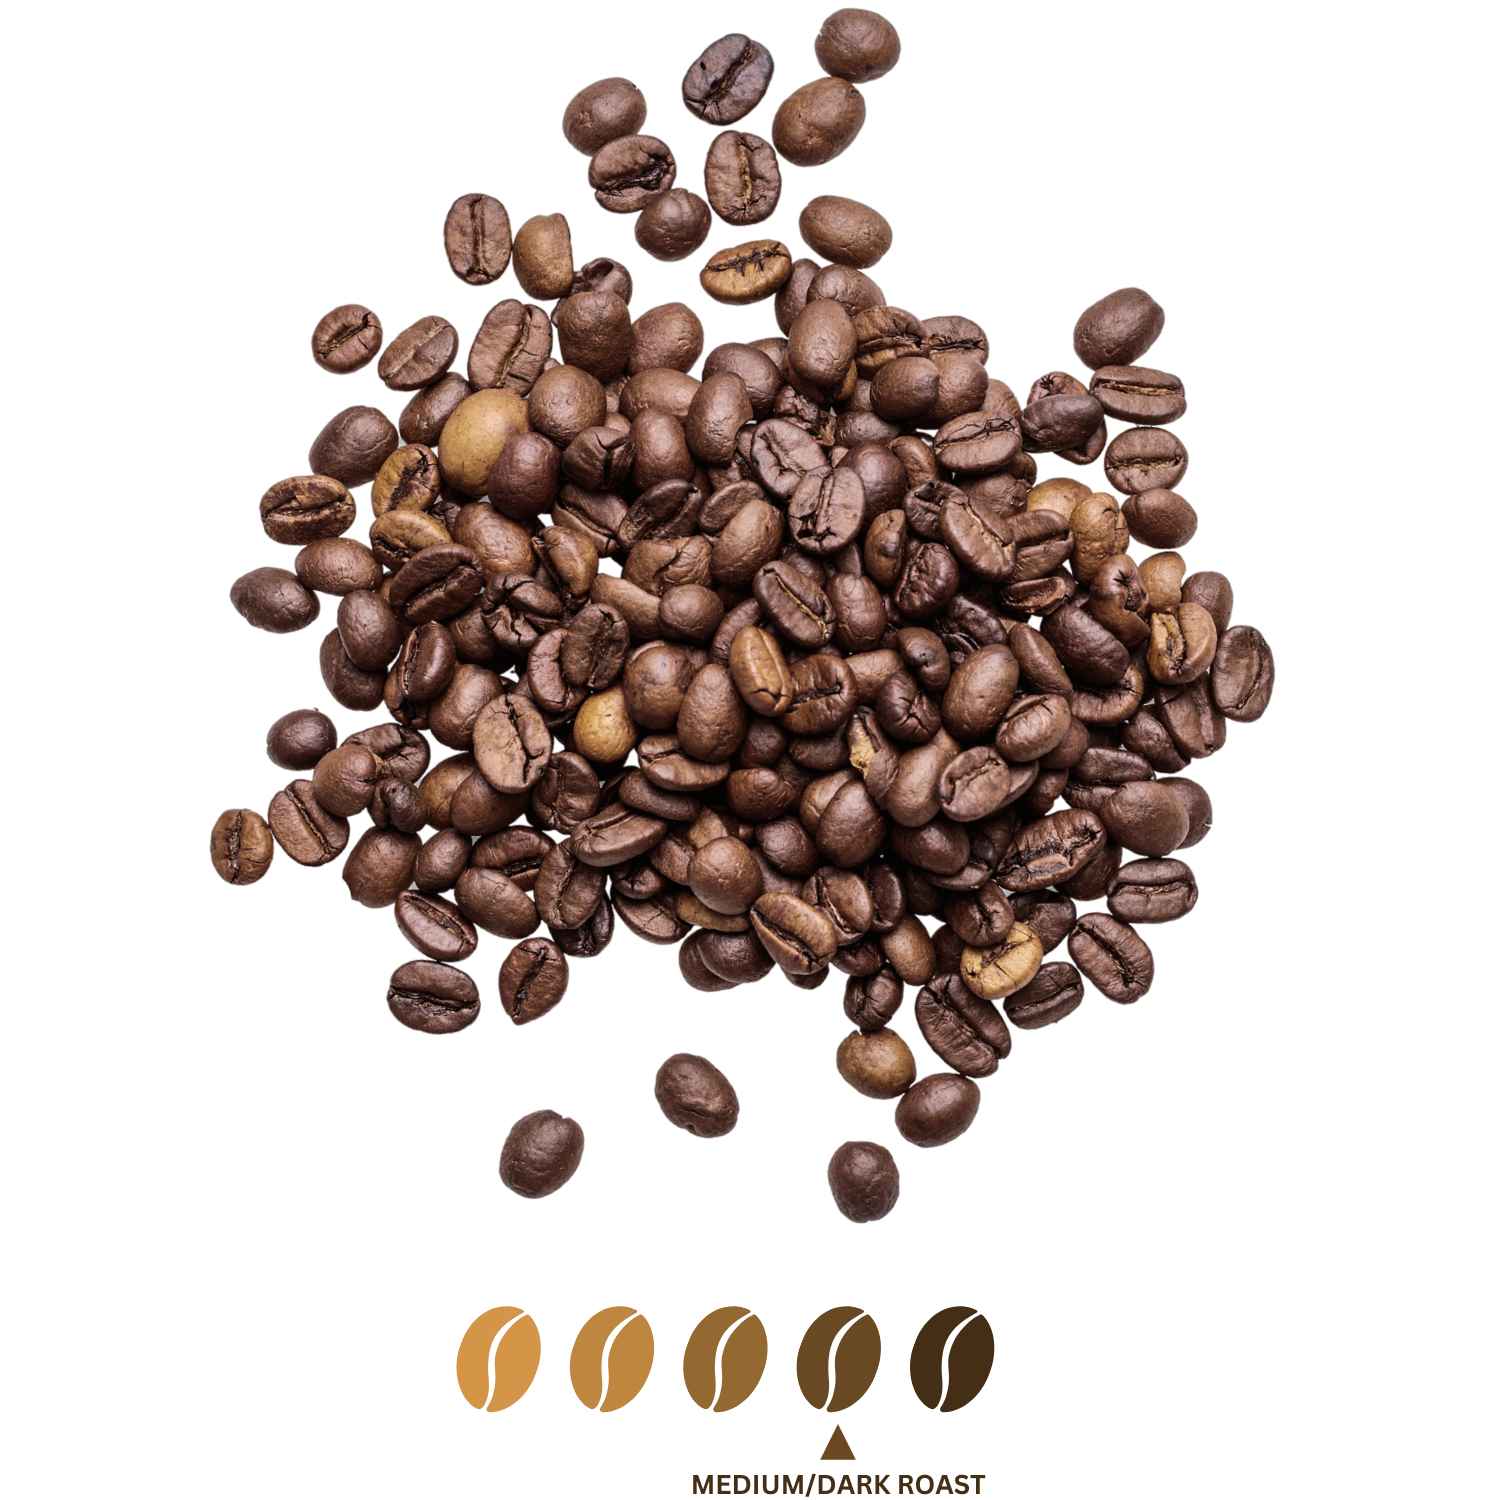 African Kahawa Blend - Canche Coffee